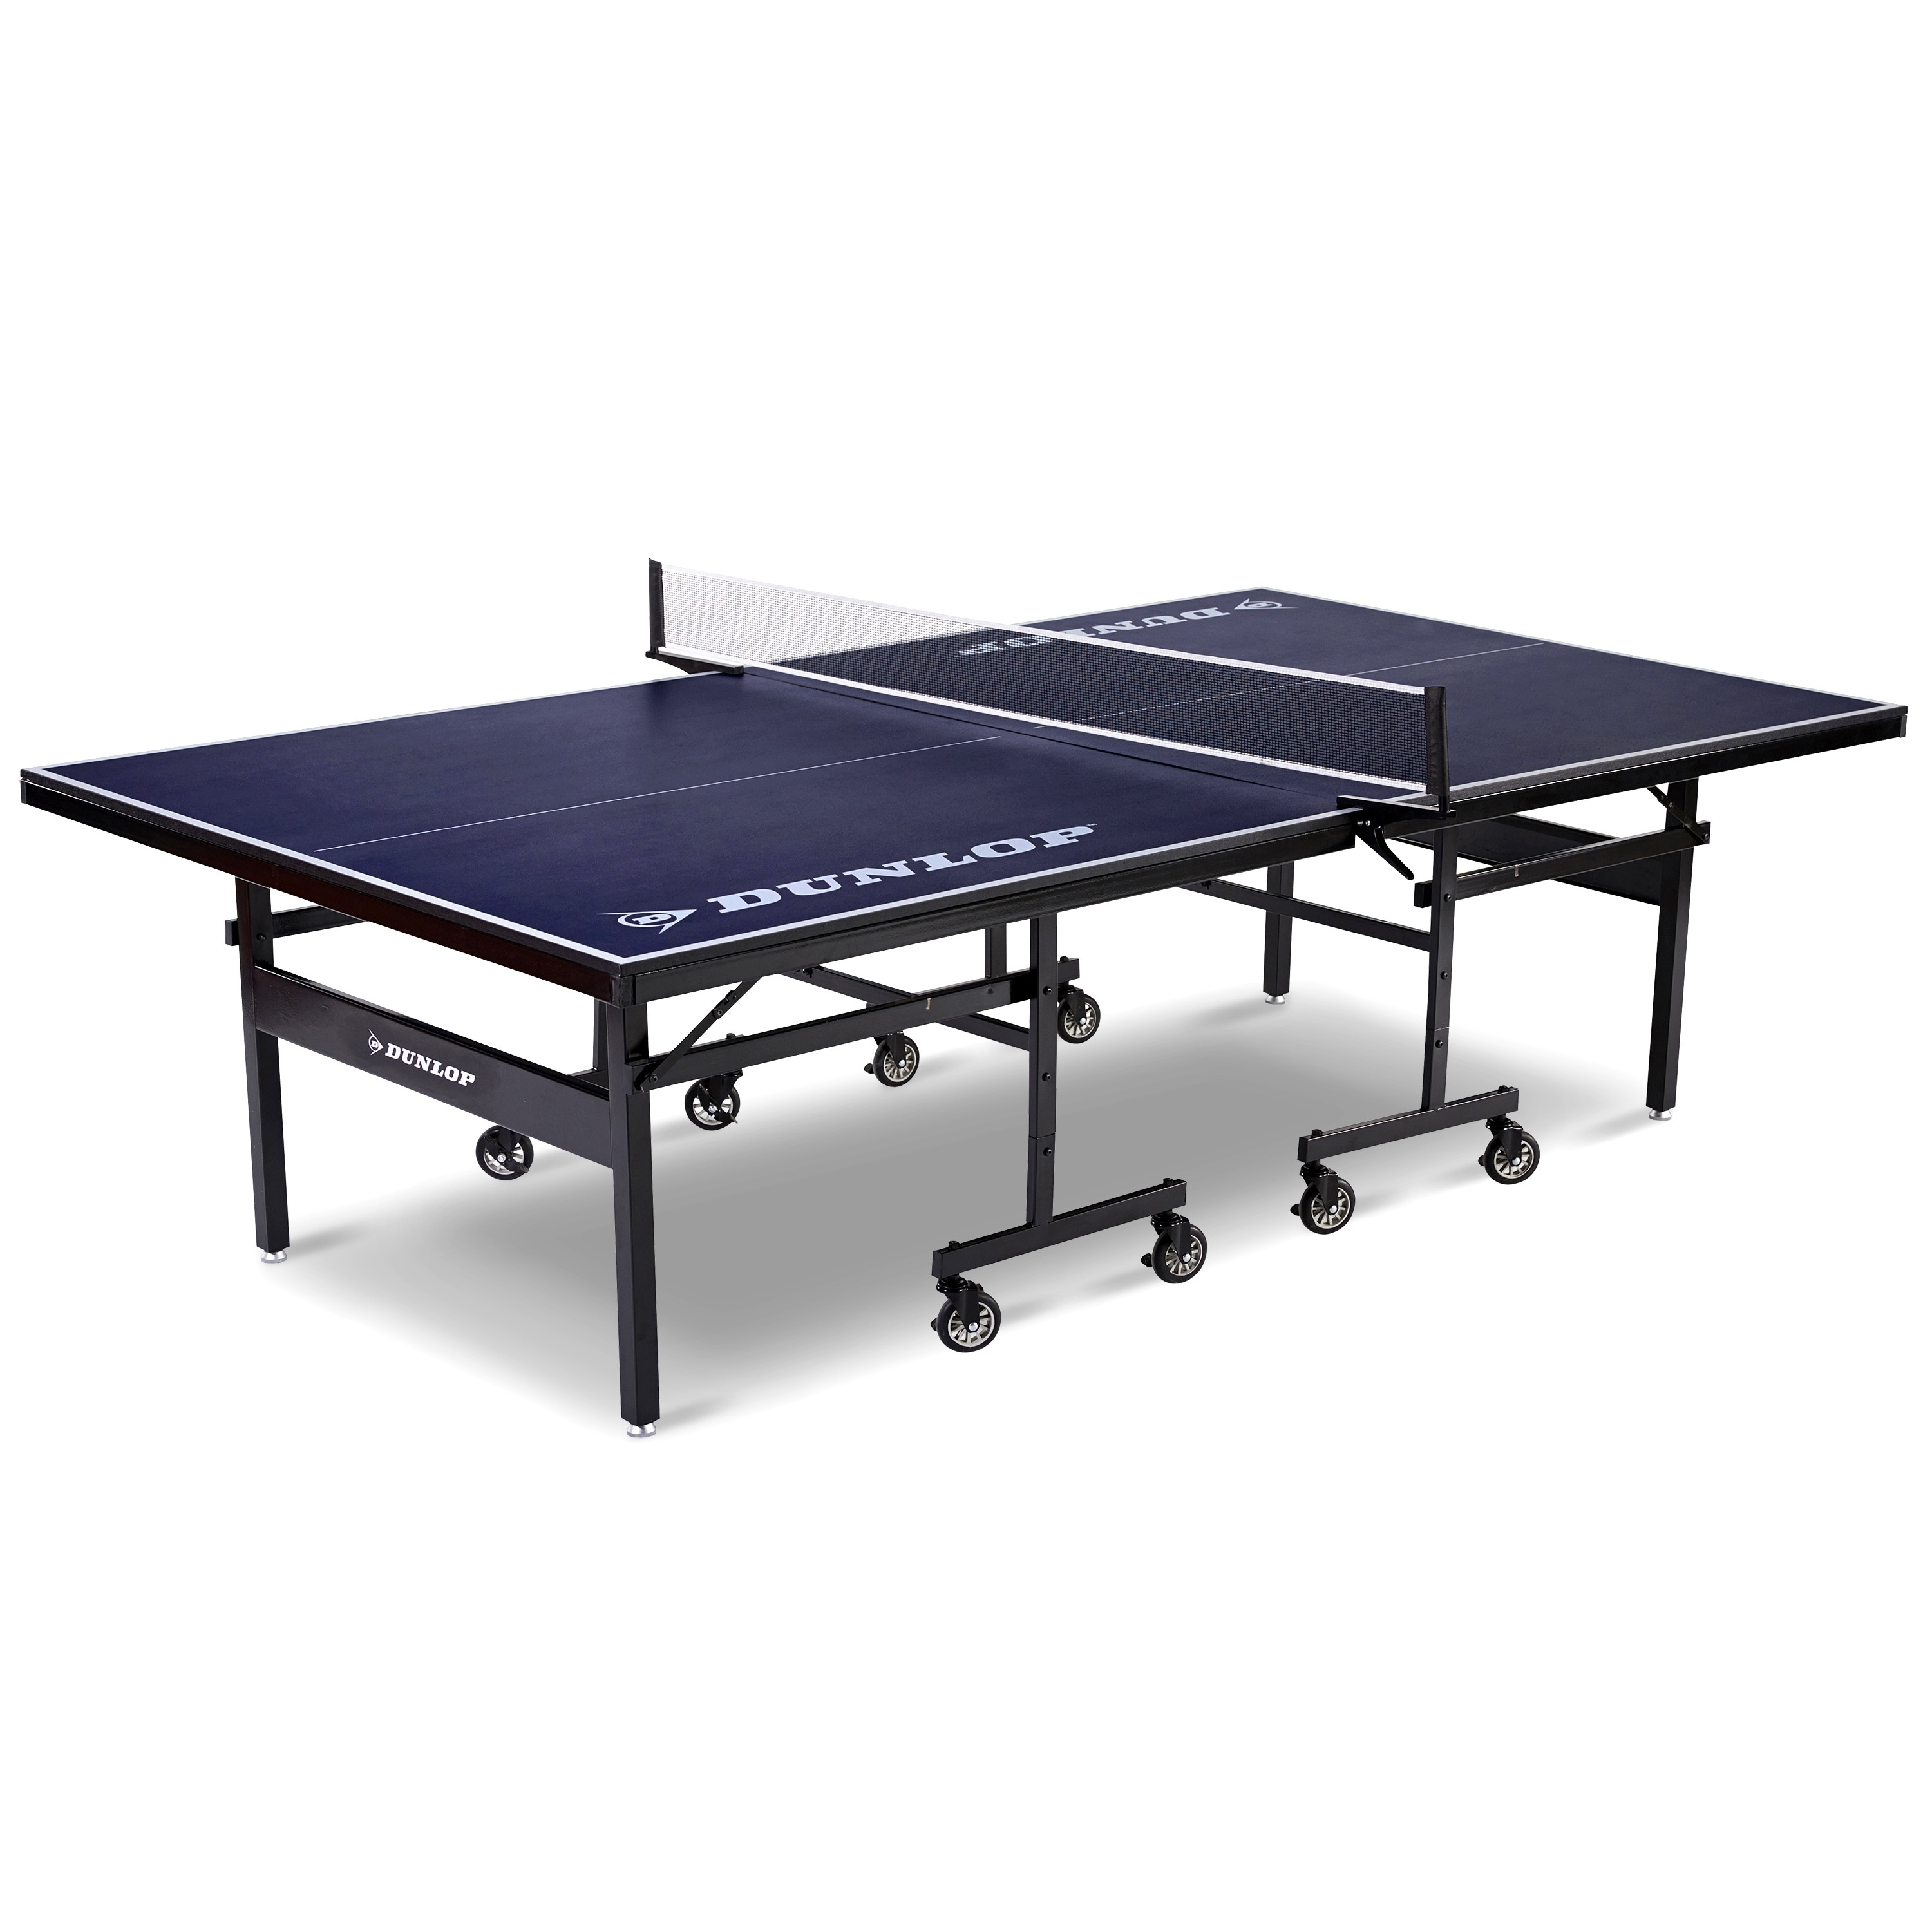 Dunlop Easy to Assemble Table Tennis Table - Bed Bath and Beyond